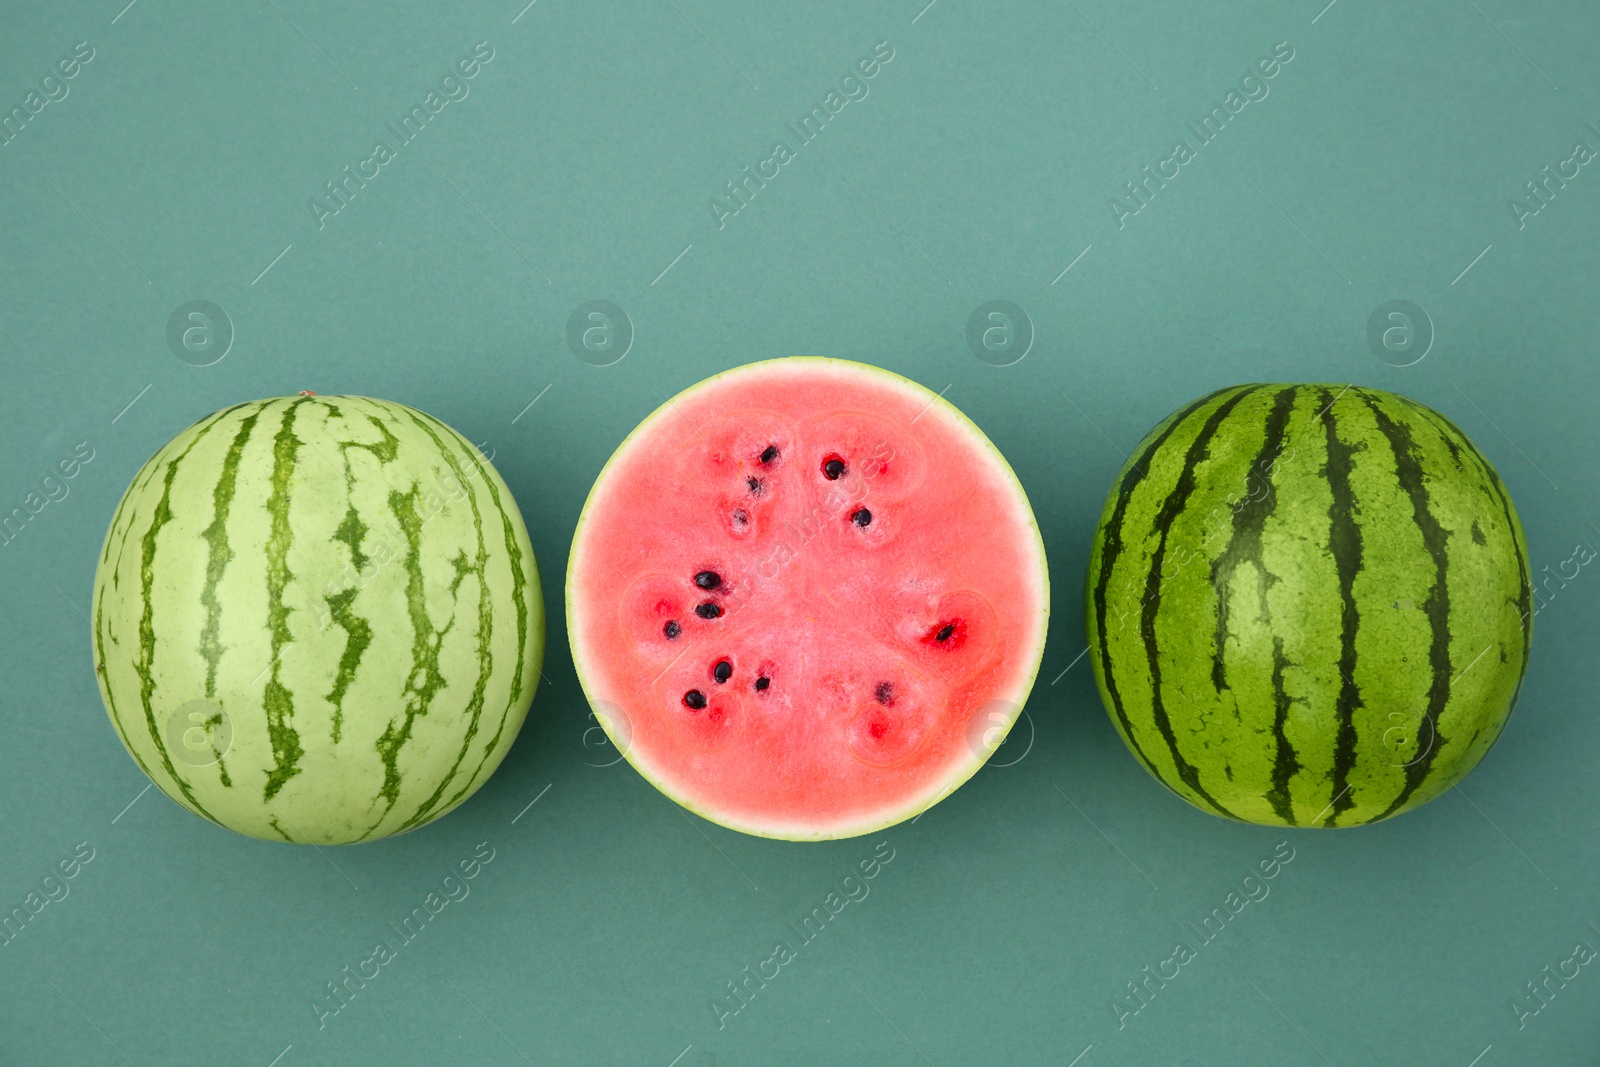 Photo of Cut and whole ripe watermelons on teal background, flat lay